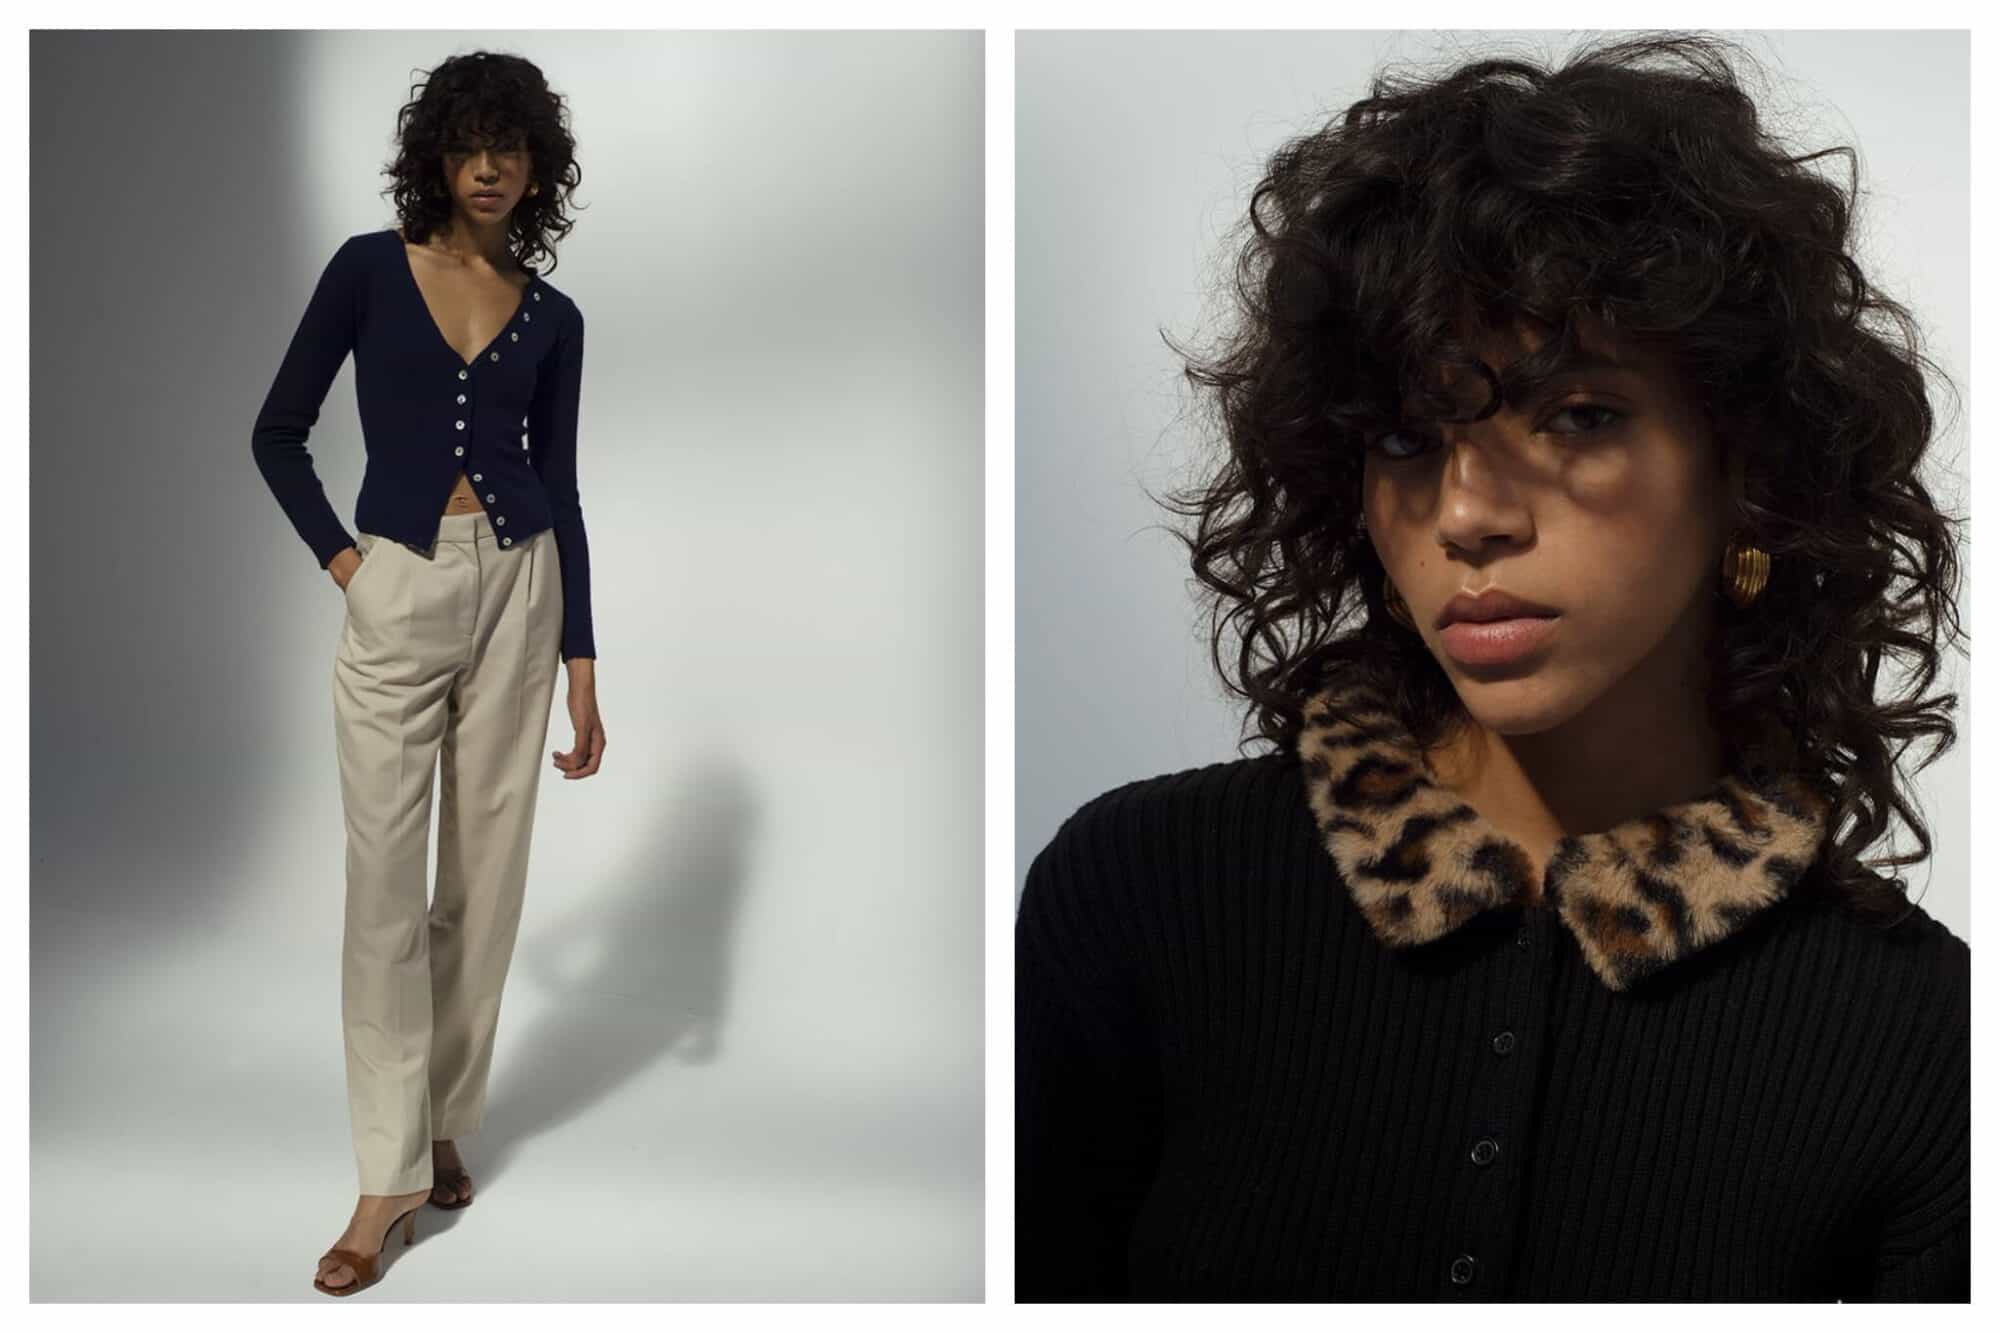 Left: a Model with curly black hair wears khaki trousers and a v neck dark sweater.
Right: The same model has a black sweater on with an animal print collar, and is photographed closed up.